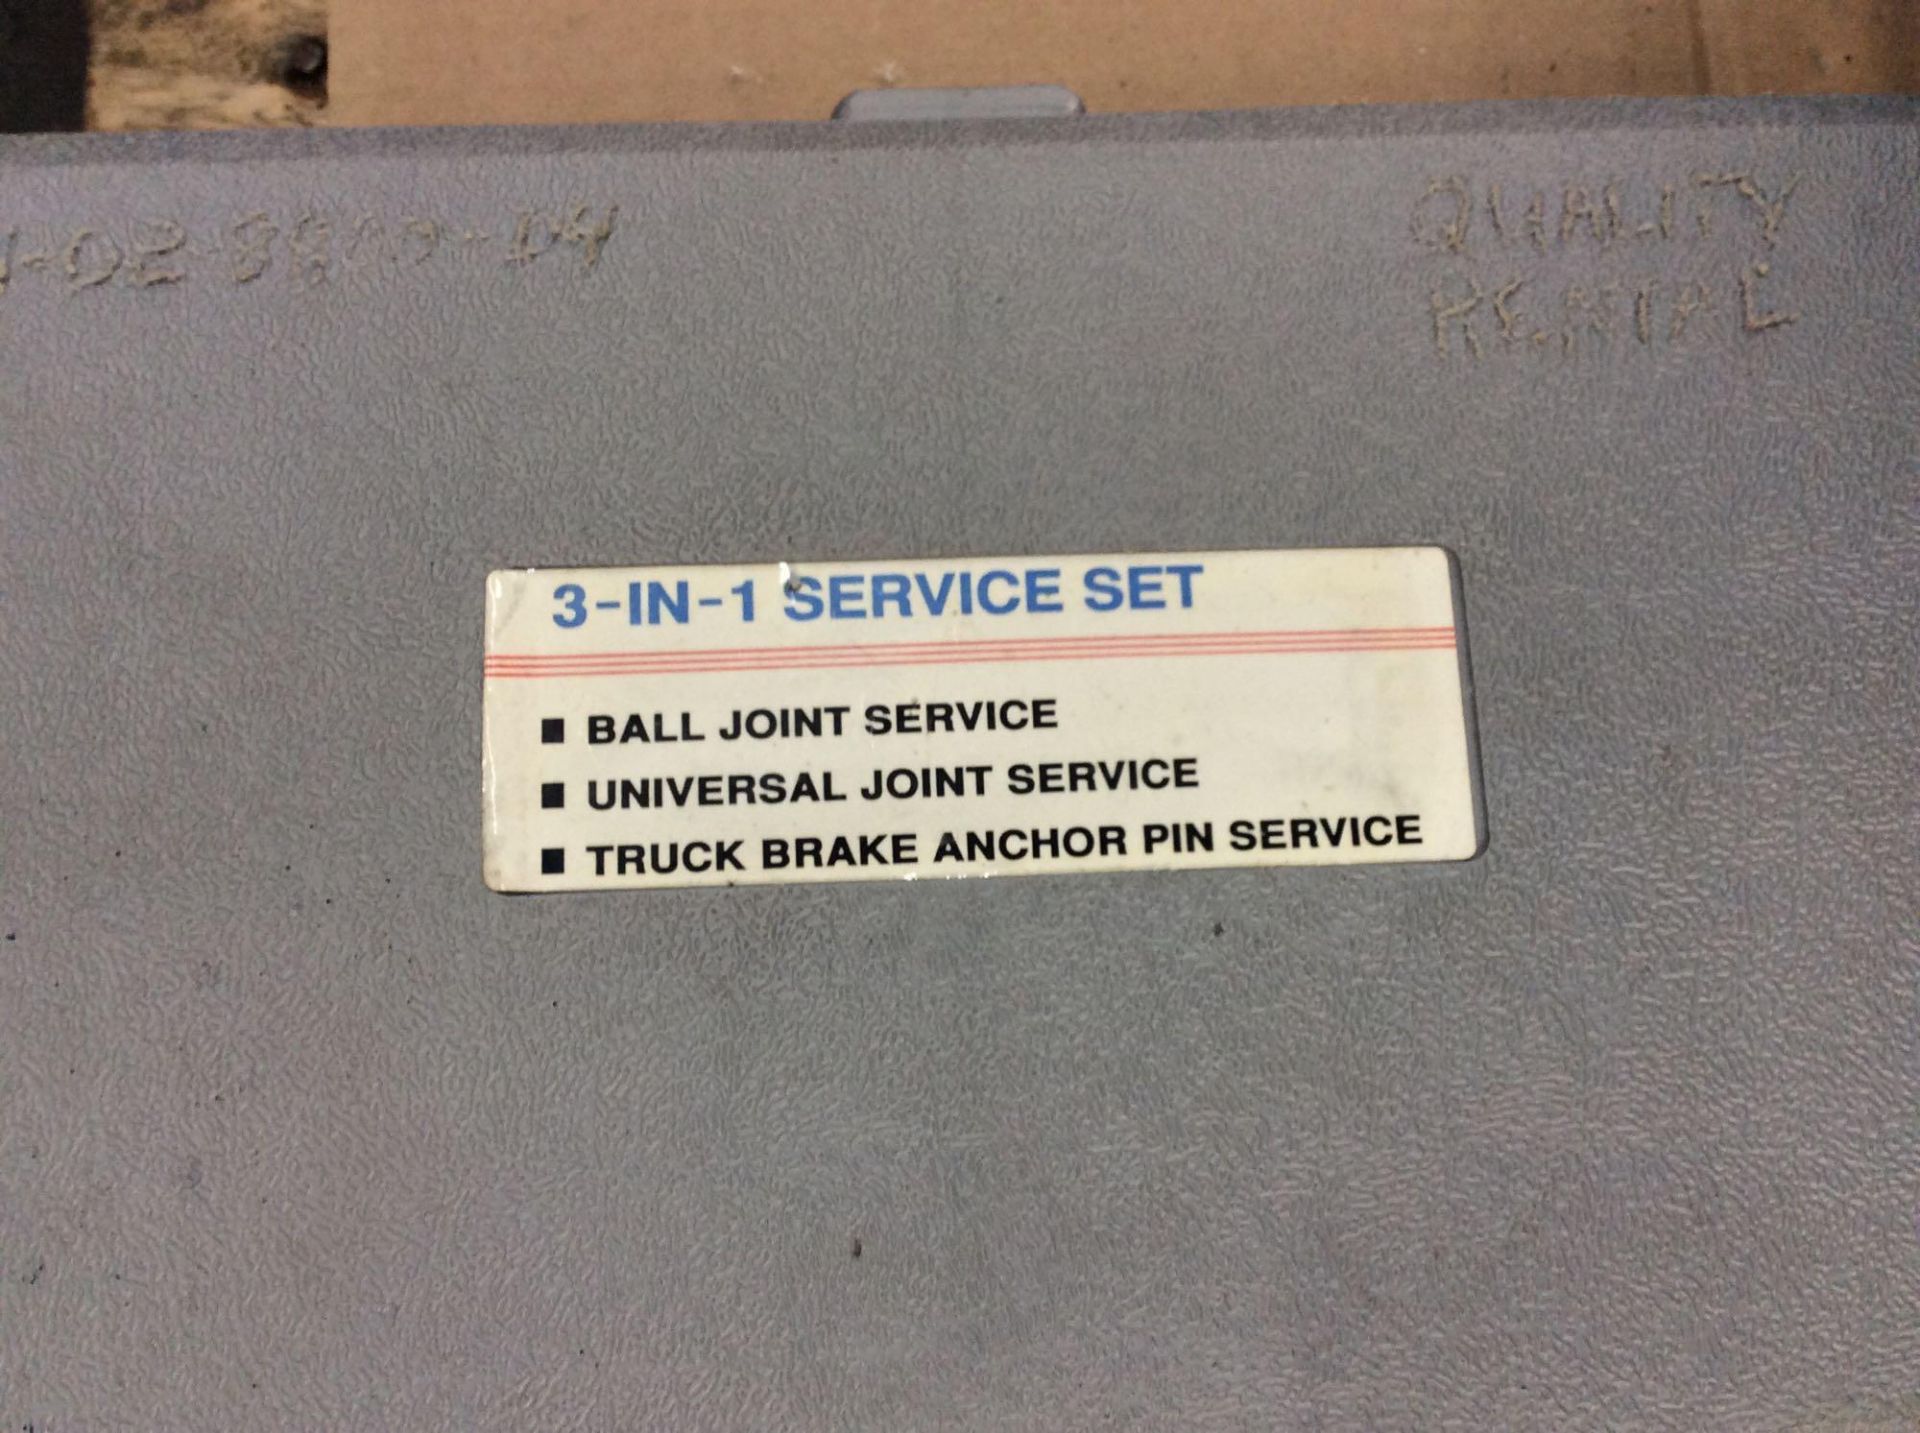 3 in 1 service set, for ball joints, universal joint, and truck brake anchor pin - Image 2 of 2